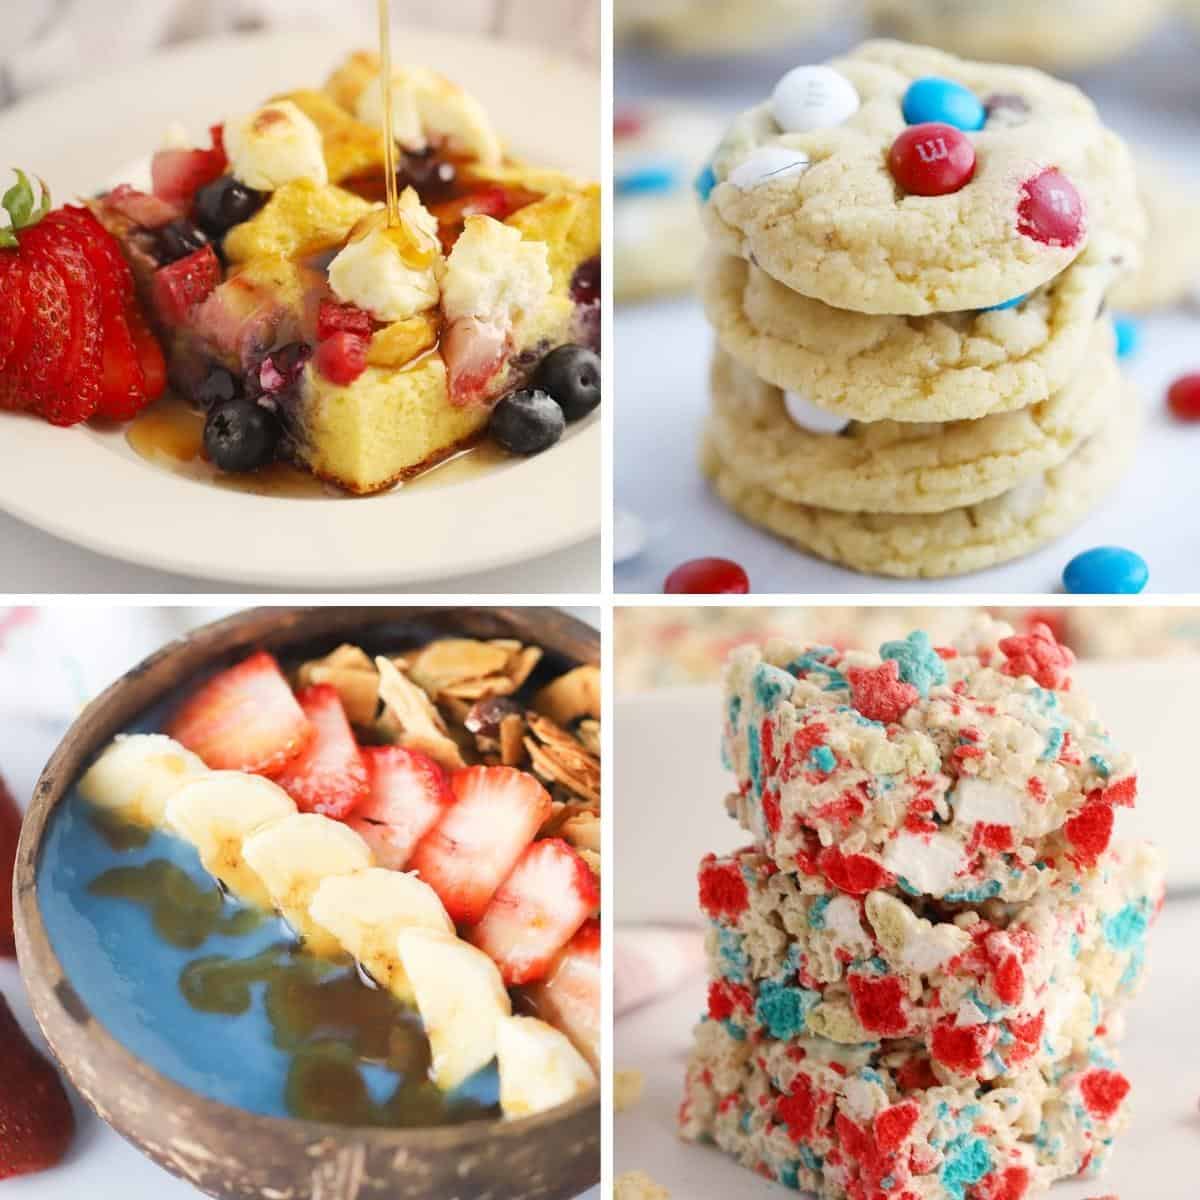 red white and blue foods for 4th of july or memorial day